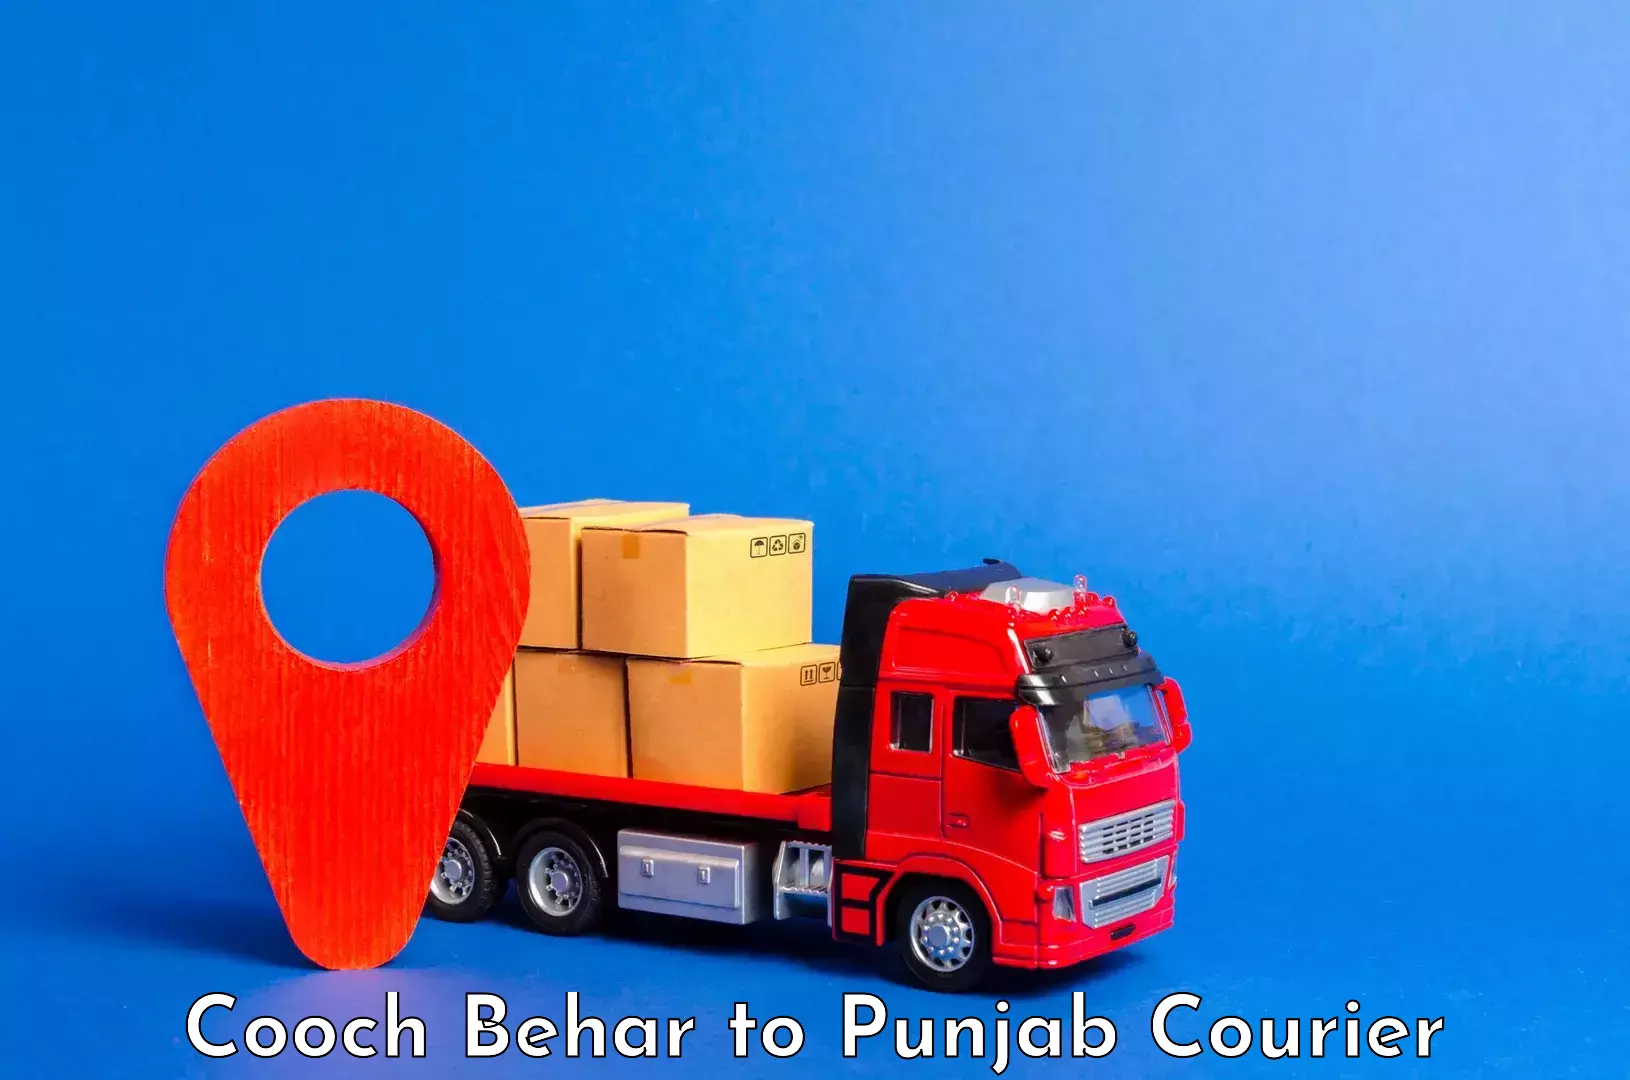 Doorstep luggage collection in Cooch Behar to Punjab